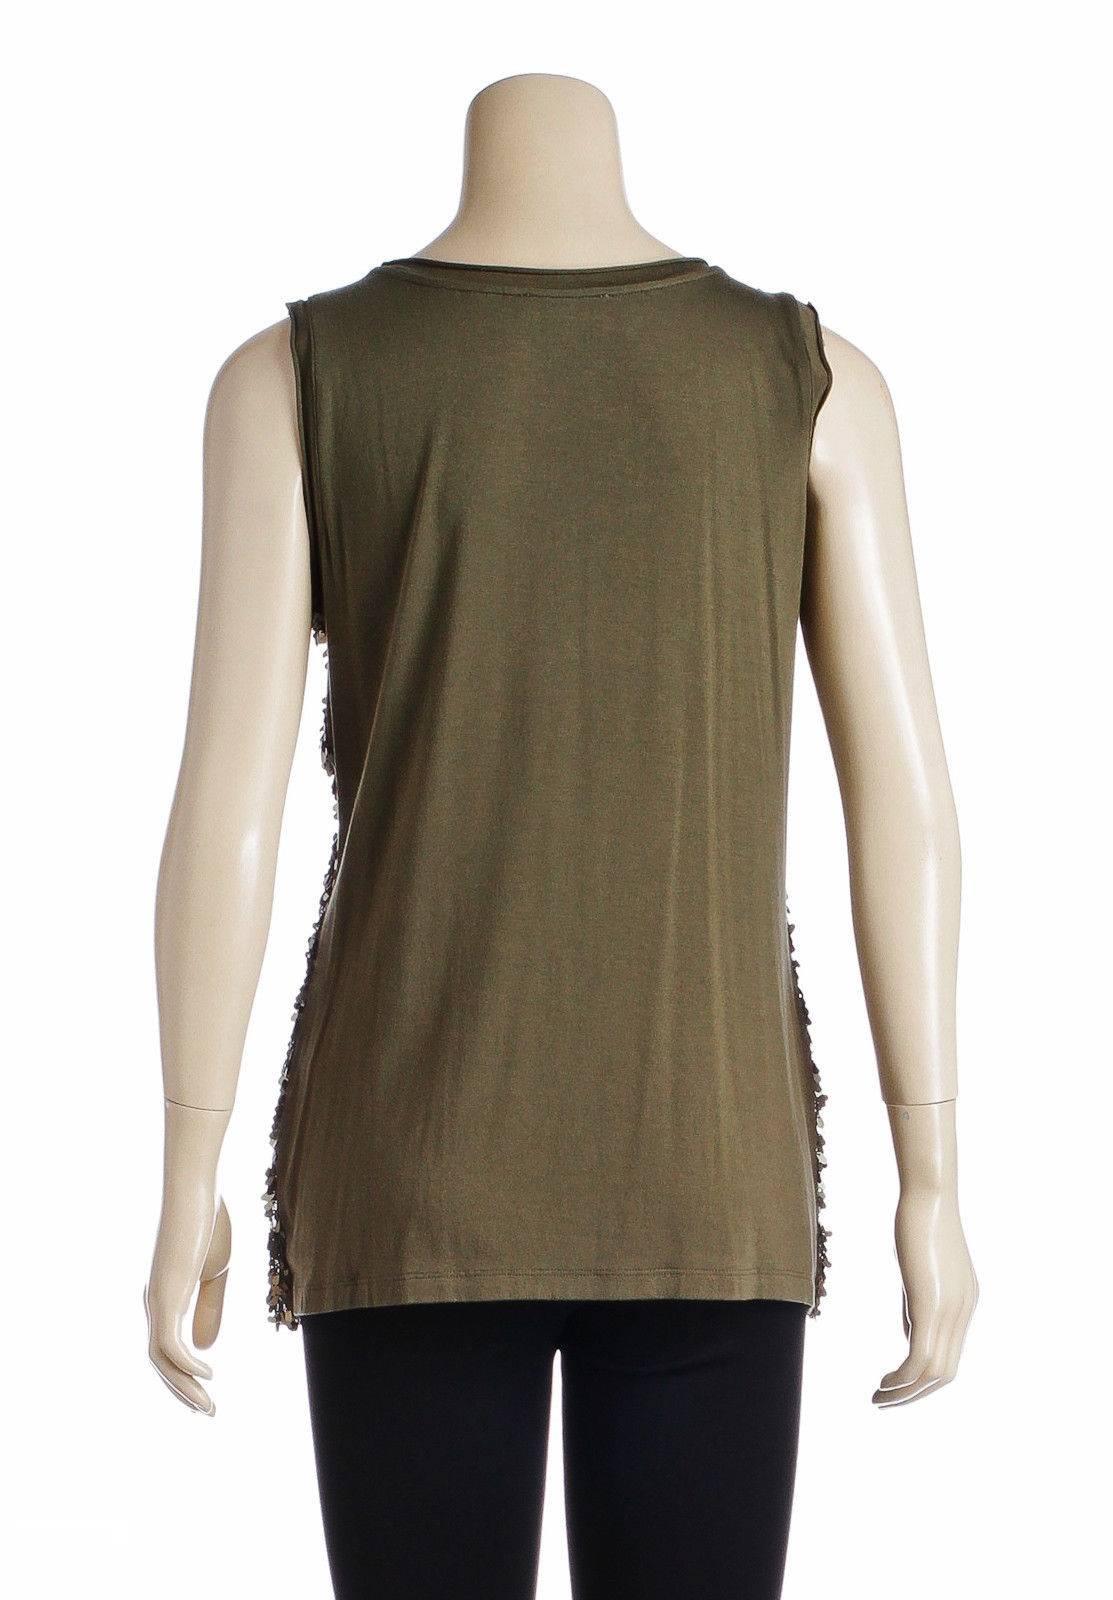 Calvin Klein Green Sleeveless Sequin Top (Size L) For Sale 1